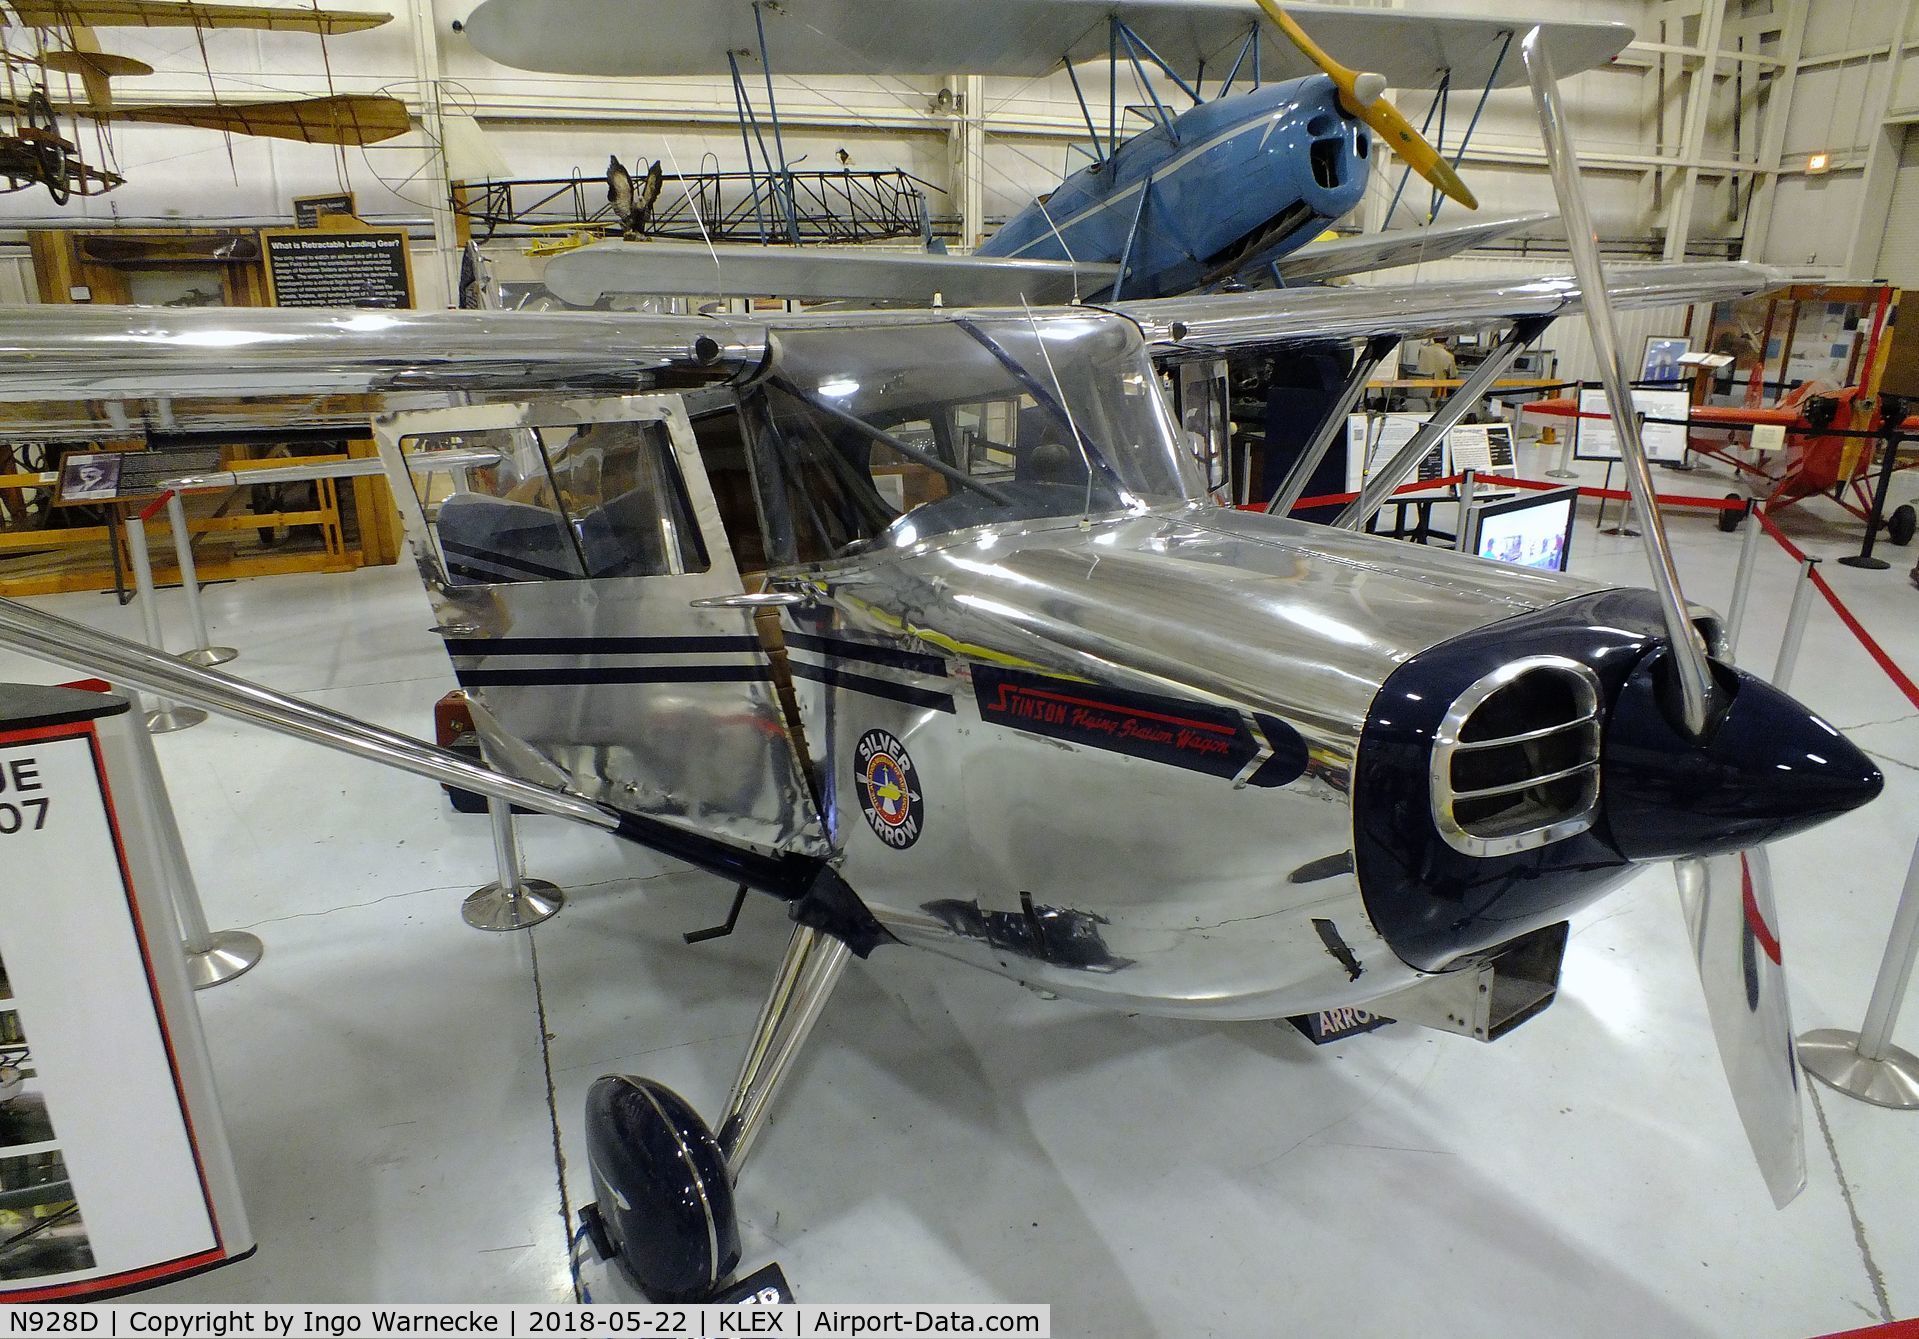 N928D, 1947 Stinson 108-2 Voyager C/N 108-2928, Stinson 108-2 Flying Station Wagon at the Aviation Museum of Kentucky, Lexington KY